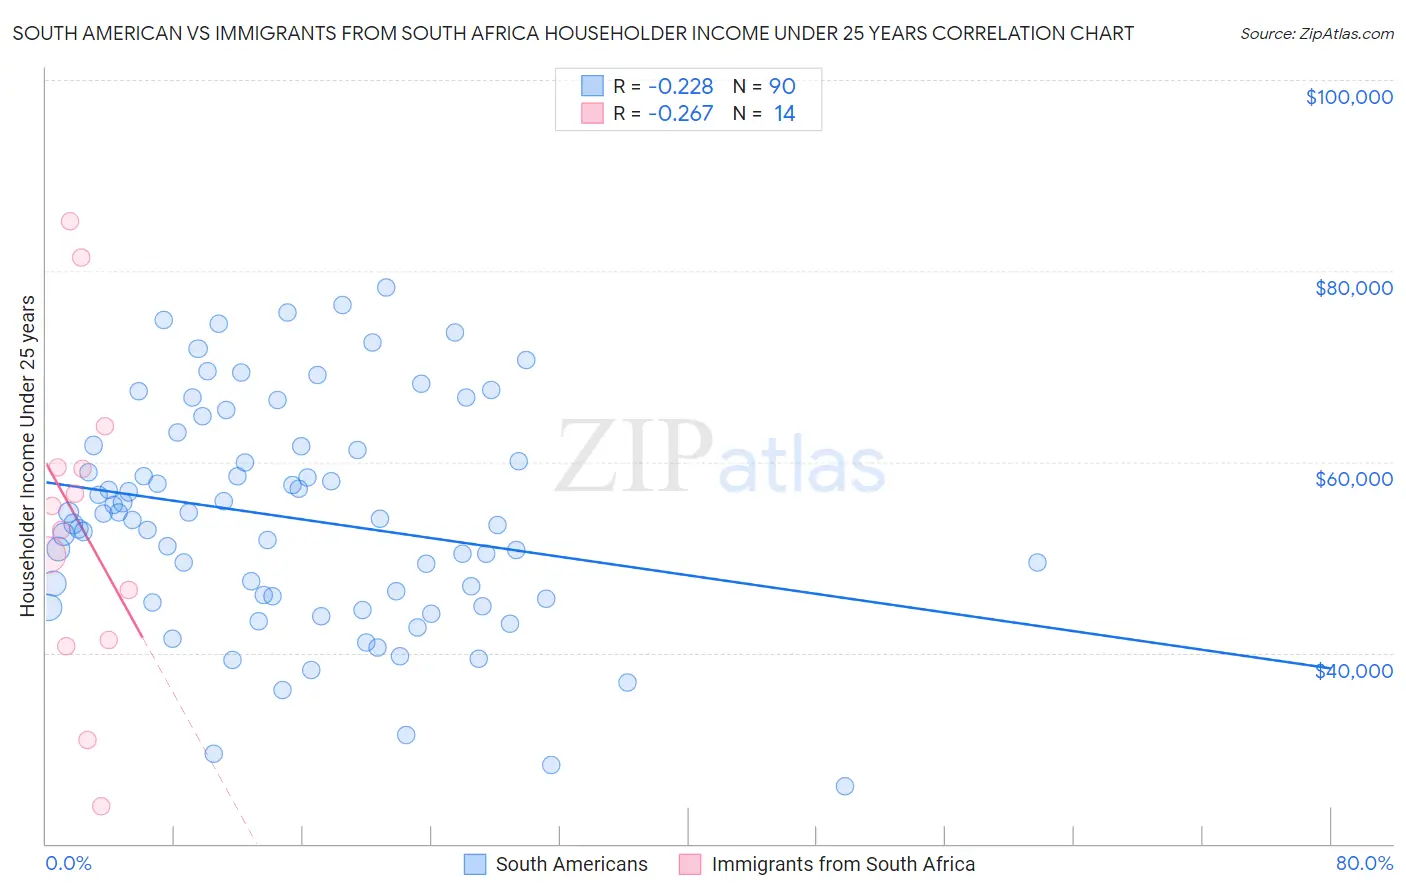 South American vs Immigrants from South Africa Householder Income Under 25 years